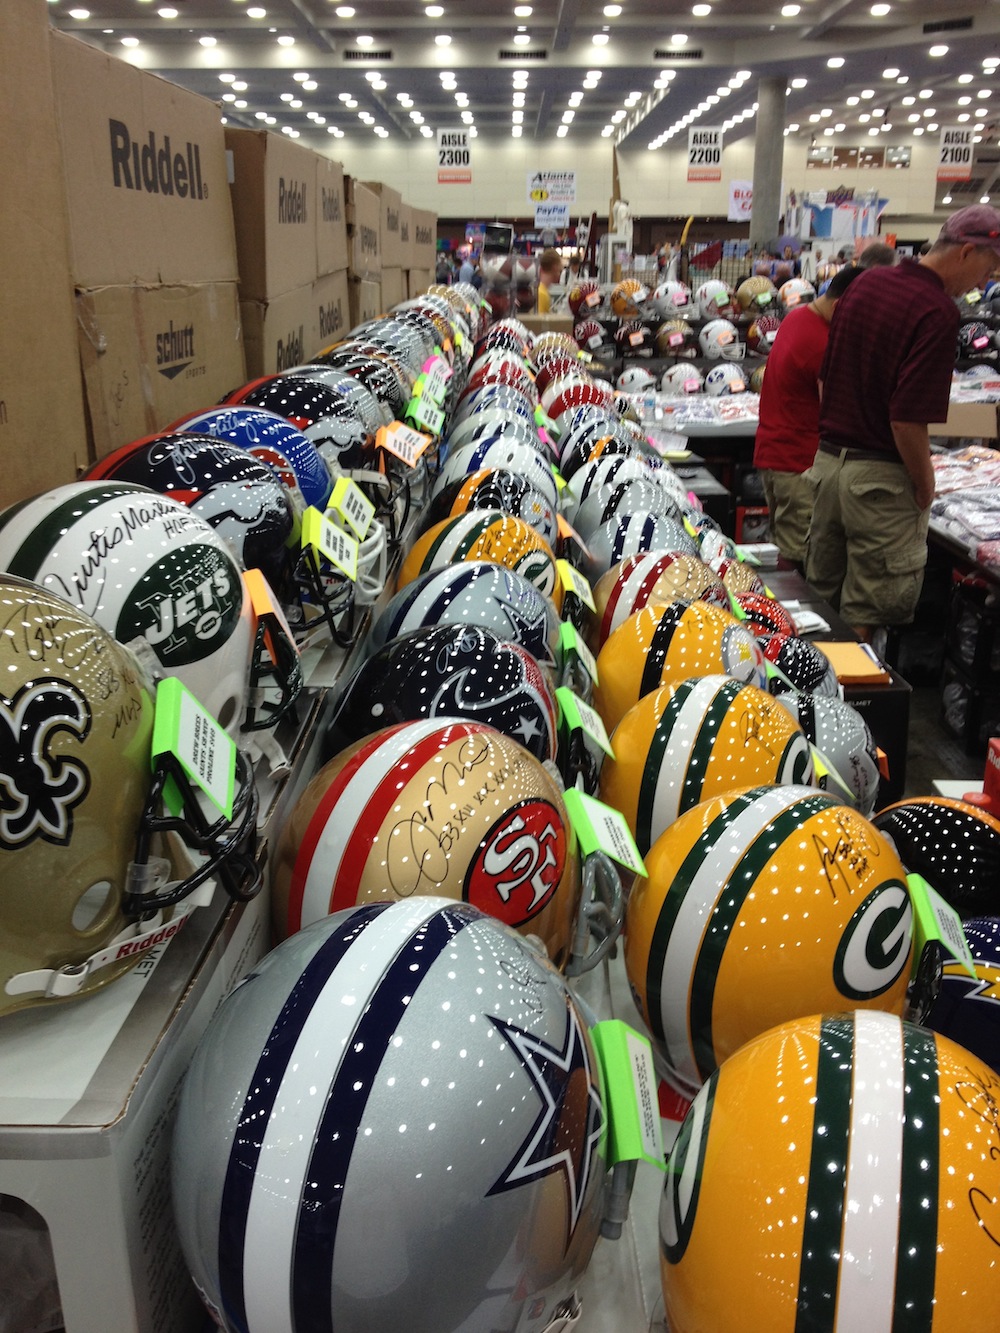 Sports memorabilia convention is the biggest show in Cleveland - ESPN